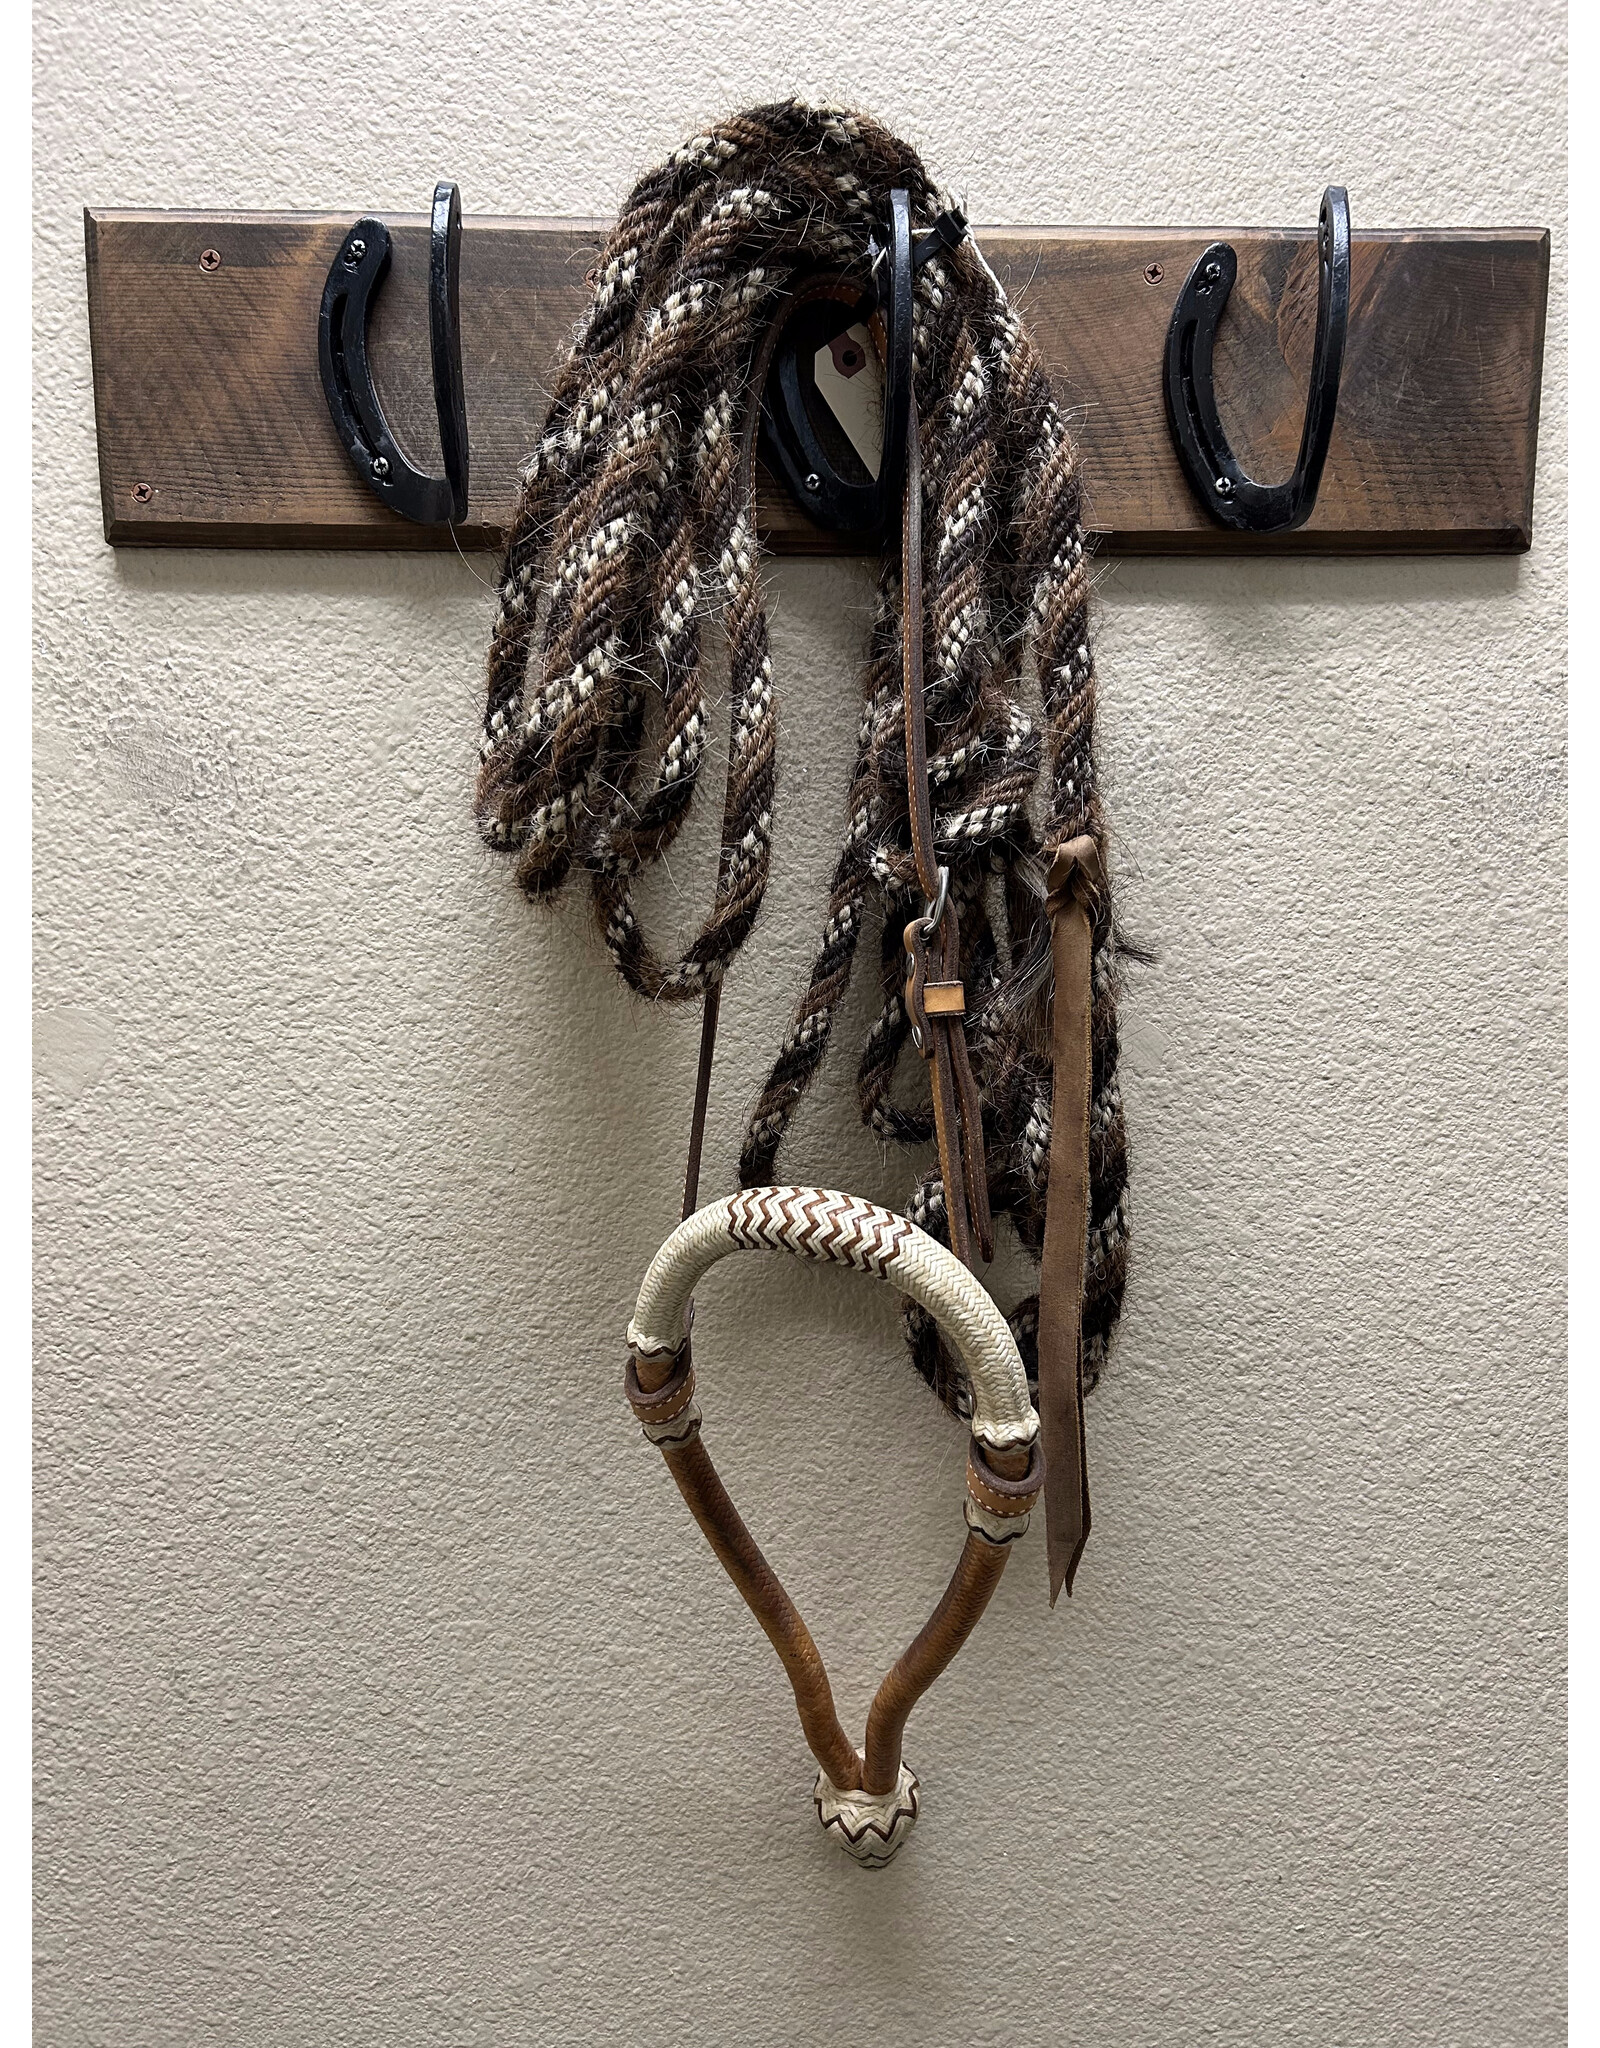 Murphy Leather Bosal with Mecate Horsehair Reins